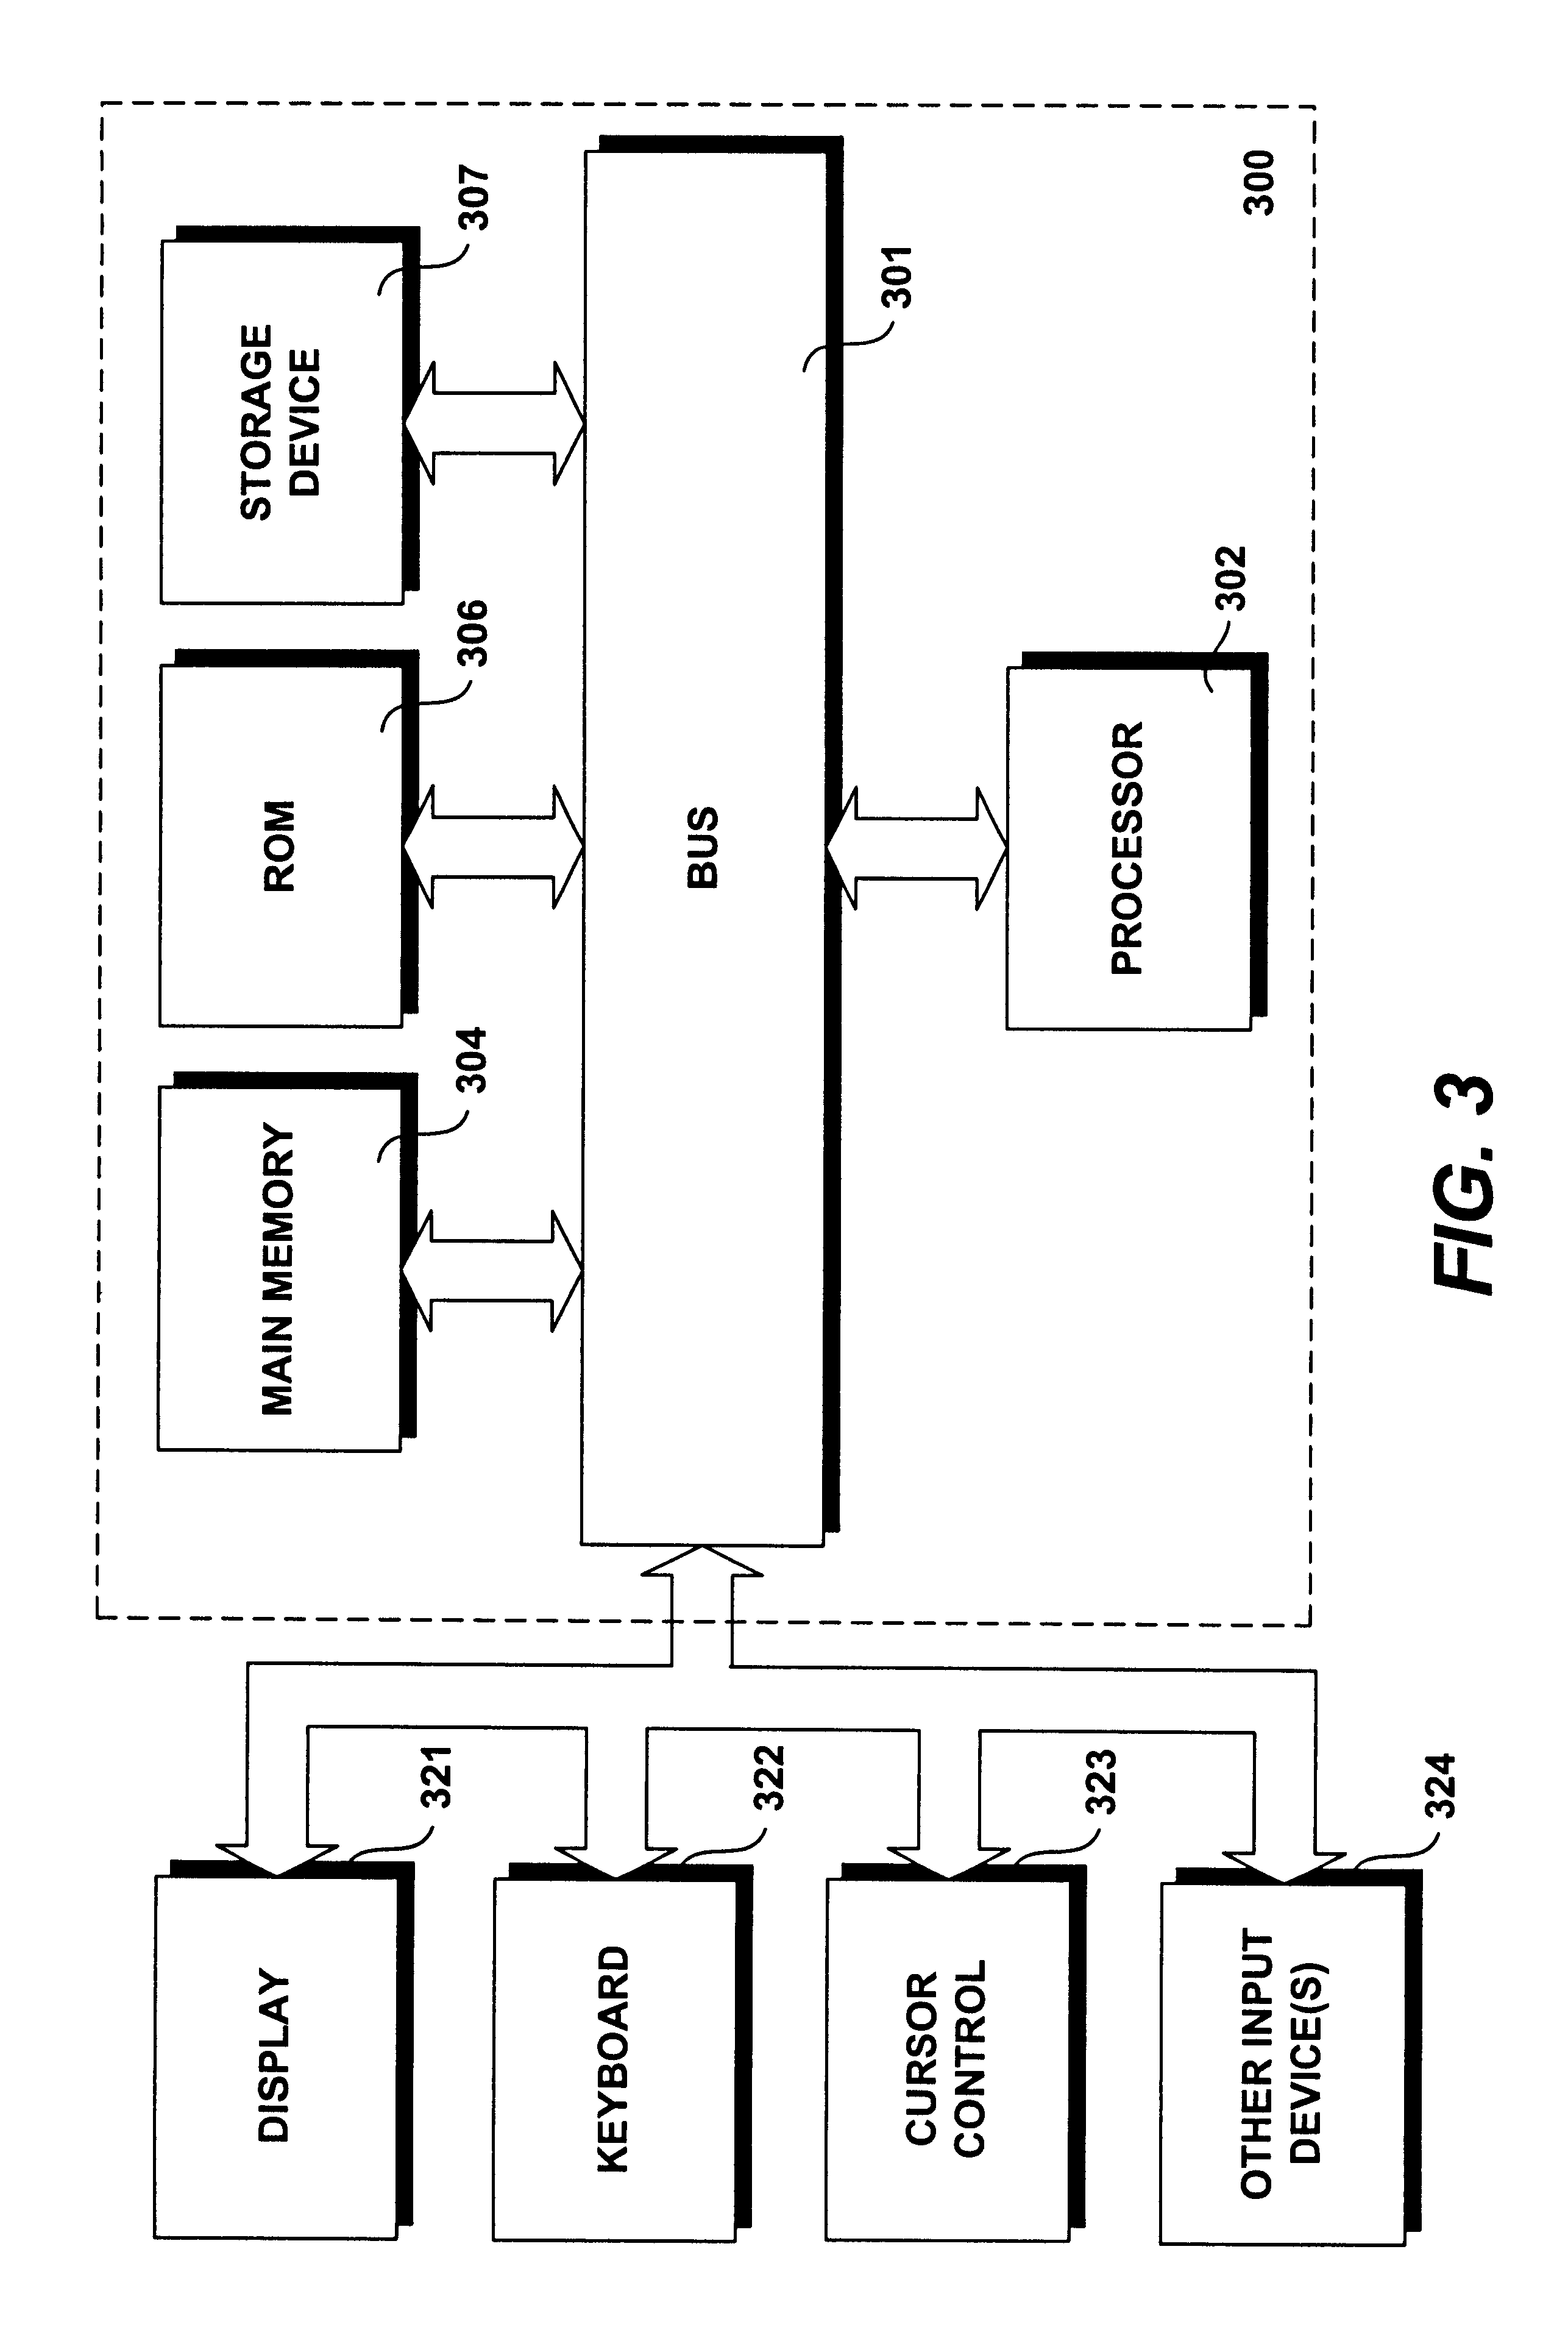 Methods, devices and systems for splitting an integrated manufacturing and distribution plan for use by separate manufacturing and distribution execution systems